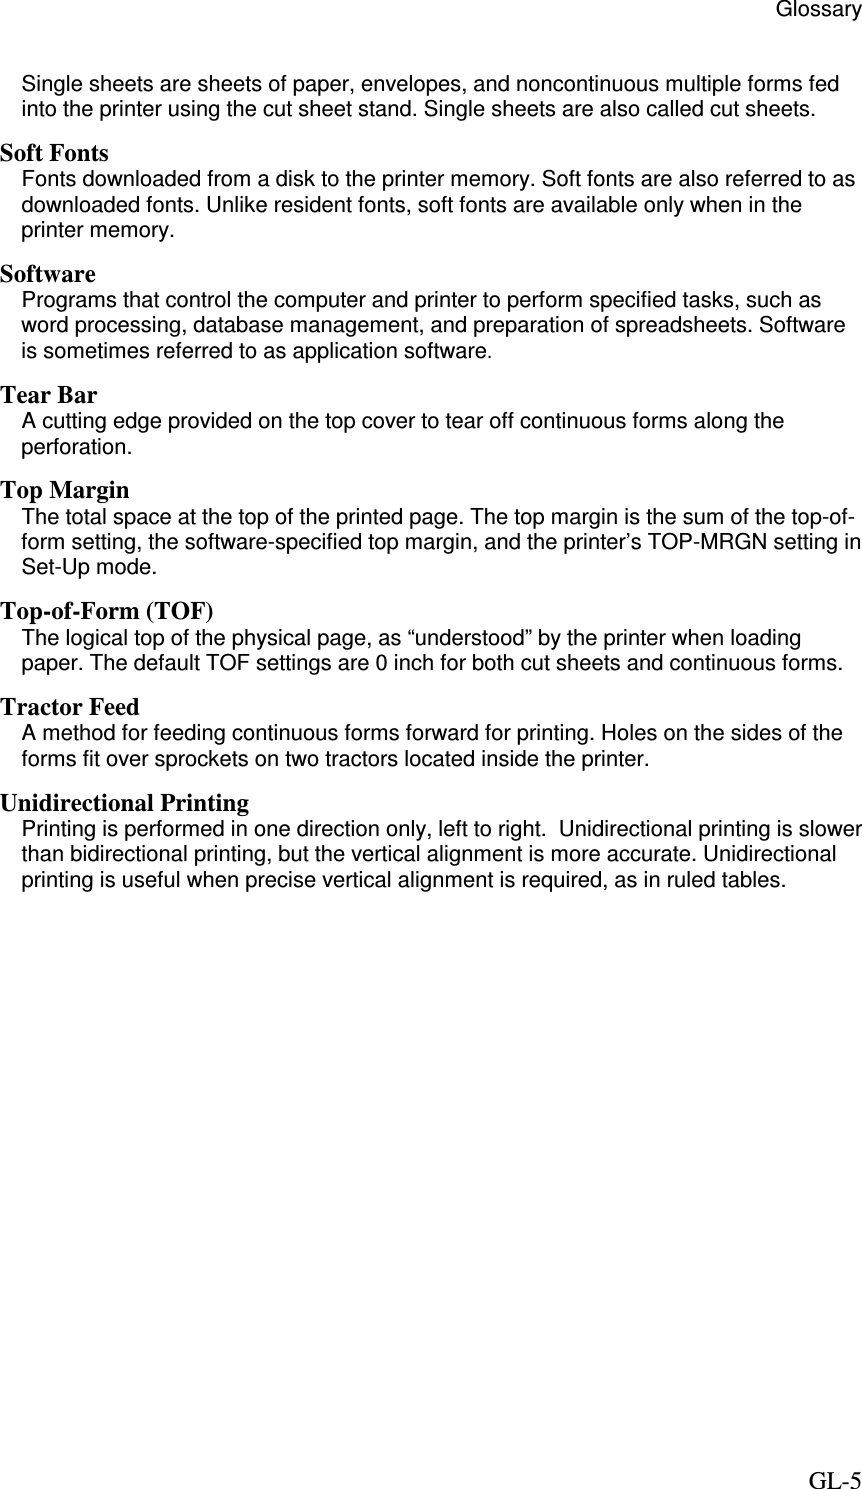                                                  Glossary     GL-5 Single sheets are sheets of paper, envelopes, and noncontinuous multiple forms fed into the printer using the cut sheet stand. Single sheets are also called cut sheets. Soft Fonts Fonts downloaded from a disk to the printer memory. Soft fonts are also referred to as downloaded fonts. Unlike resident fonts, soft fonts are available only when in the printer memory. Software Programs that control the computer and printer to perform specified tasks, such as word processing, database management, and preparation of spreadsheets. Software is sometimes referred to as application software. Tear Bar A cutting edge provided on the top cover to tear off continuous forms along the perforation. Top Margin The total space at the top of the printed page. The top margin is the sum of the top-of-form setting, the software-specified top margin, and the printer’s TOP-MRGN setting in Set-Up mode. Top-of-Form (TOF) The logical top of the physical page, as “understood” by the printer when loading paper. The default TOF settings are 0 inch for both cut sheets and continuous forms. Tractor Feed A method for feeding continuous forms forward for printing. Holes on the sides of the forms fit over sprockets on two tractors located inside the printer.  Unidirectional Printing Printing is performed in one direction only, left to right.  Unidirectional printing is slower than bidirectional printing, but the vertical alignment is more accurate. Unidirectional printing is useful when precise vertical alignment is required, as in ruled tables.  